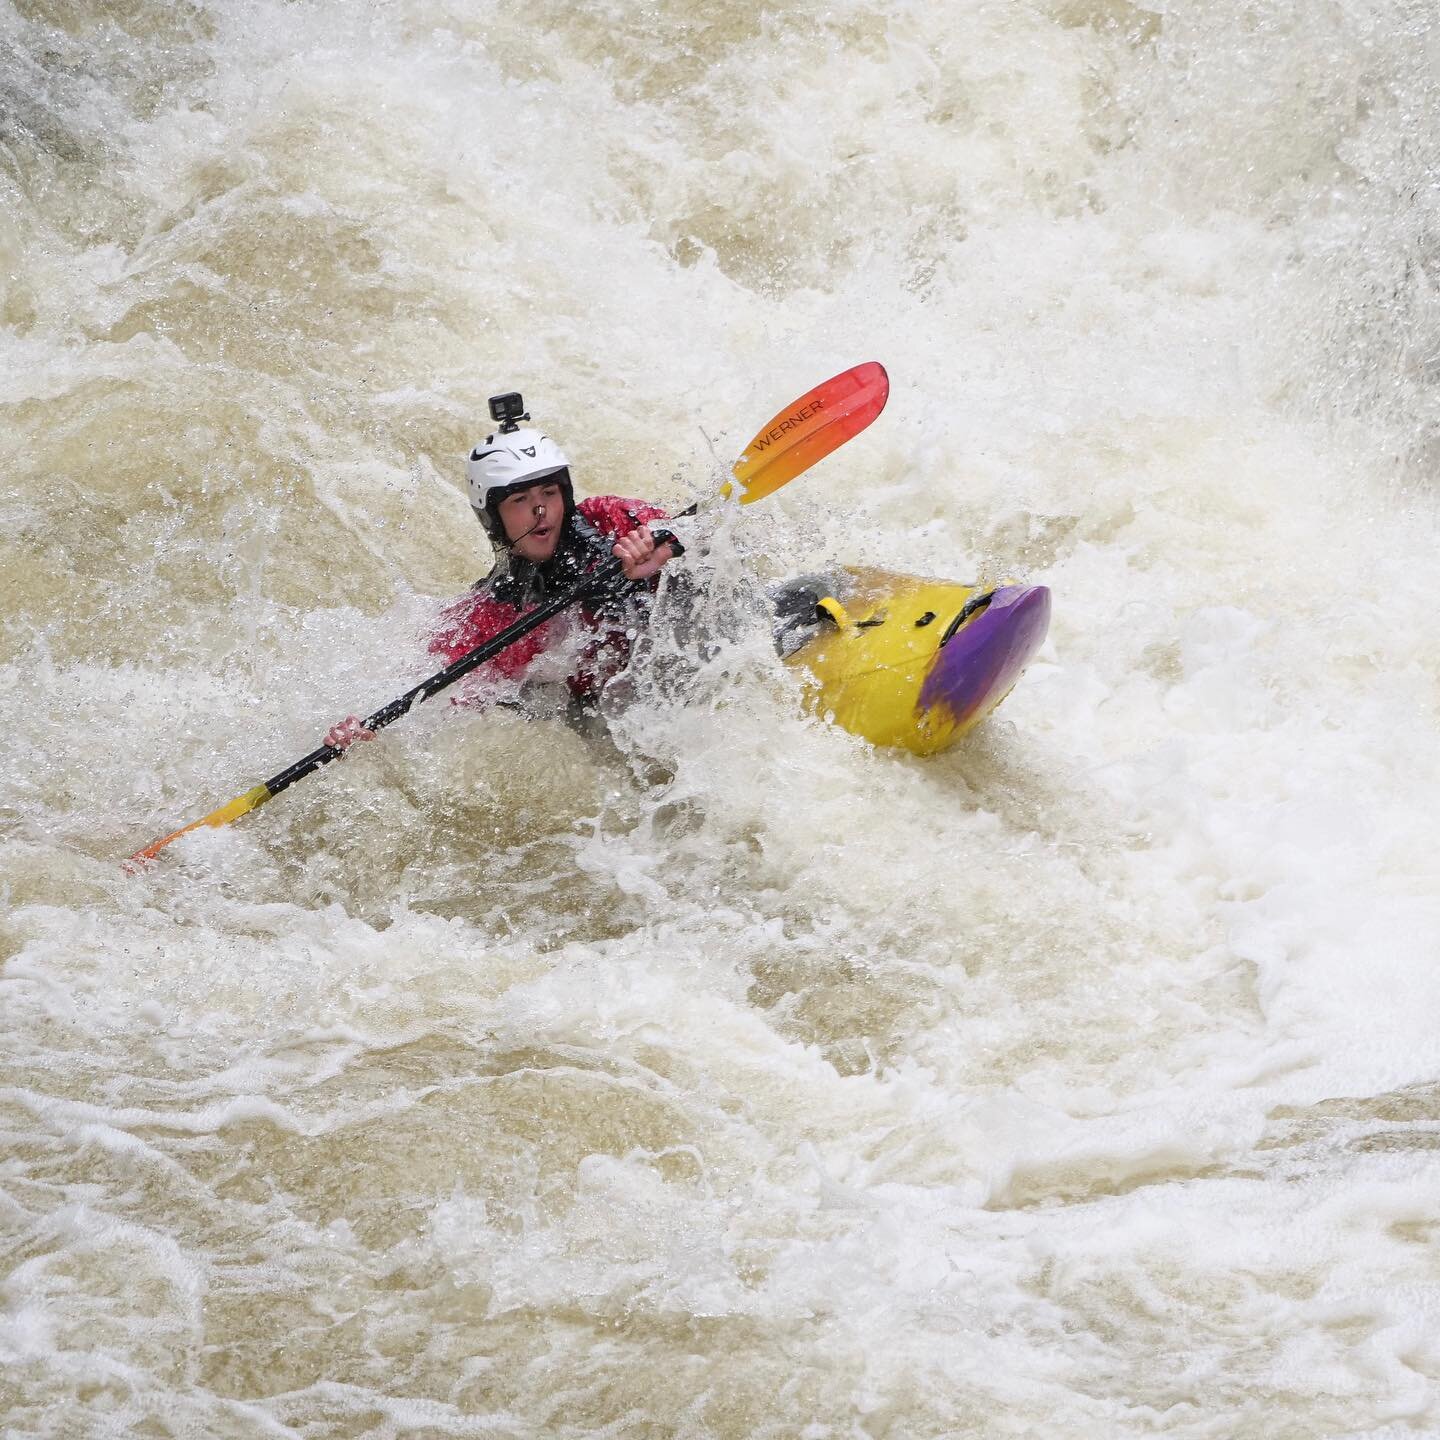 A whole lot of paddling going on in Cuyahoga Falls.
#cuyahogafallsfest #kayaking #cuyahogariver